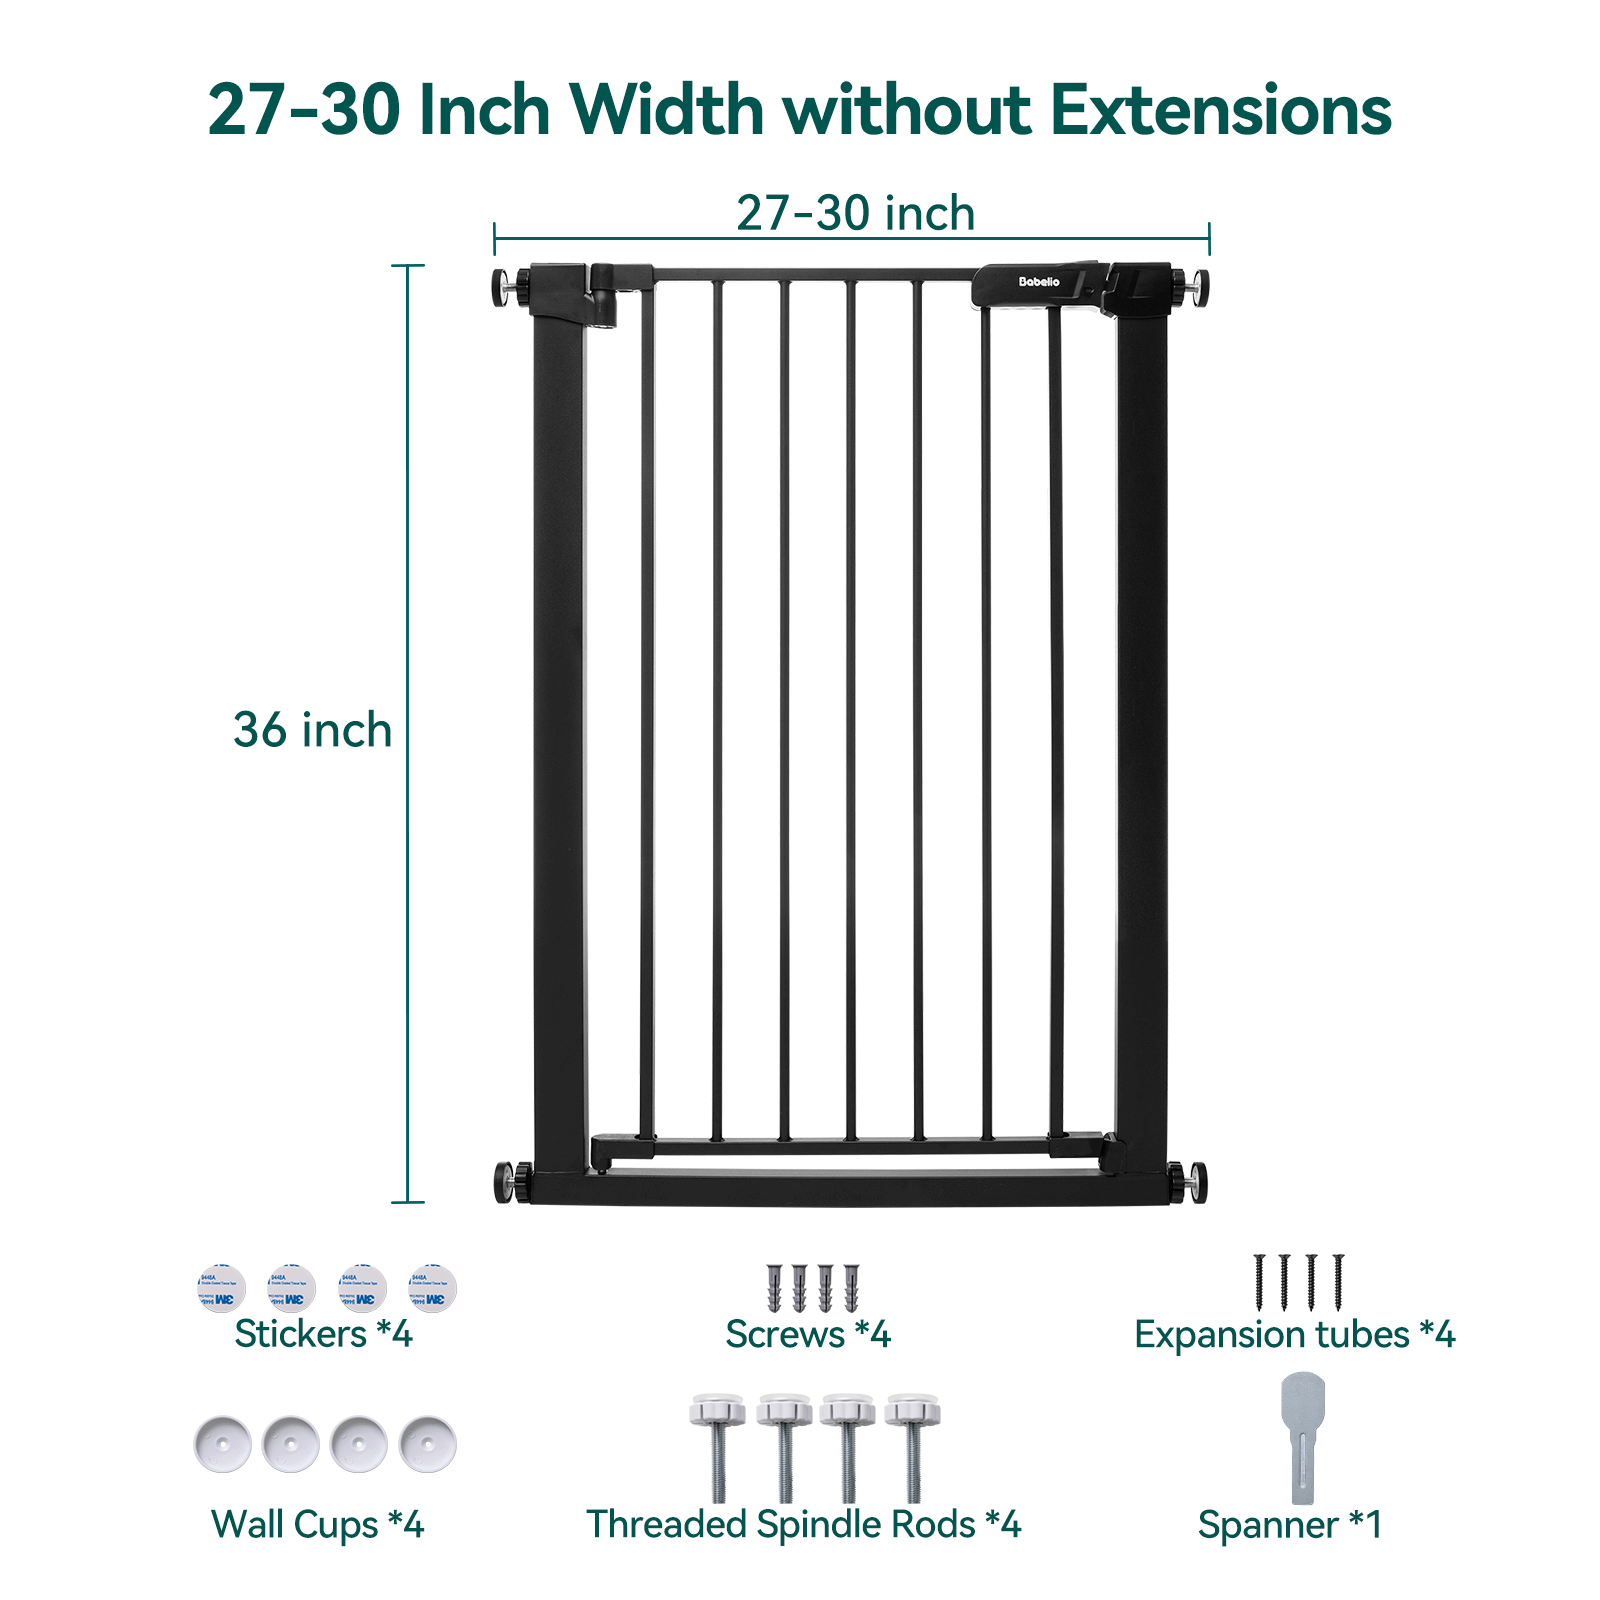 36" Tall Narrow Baby & Pet Gate - Fits 27-30 Inch Openings - Easy Walk Thru - Pressure/Hardware Mounted Safety Gate